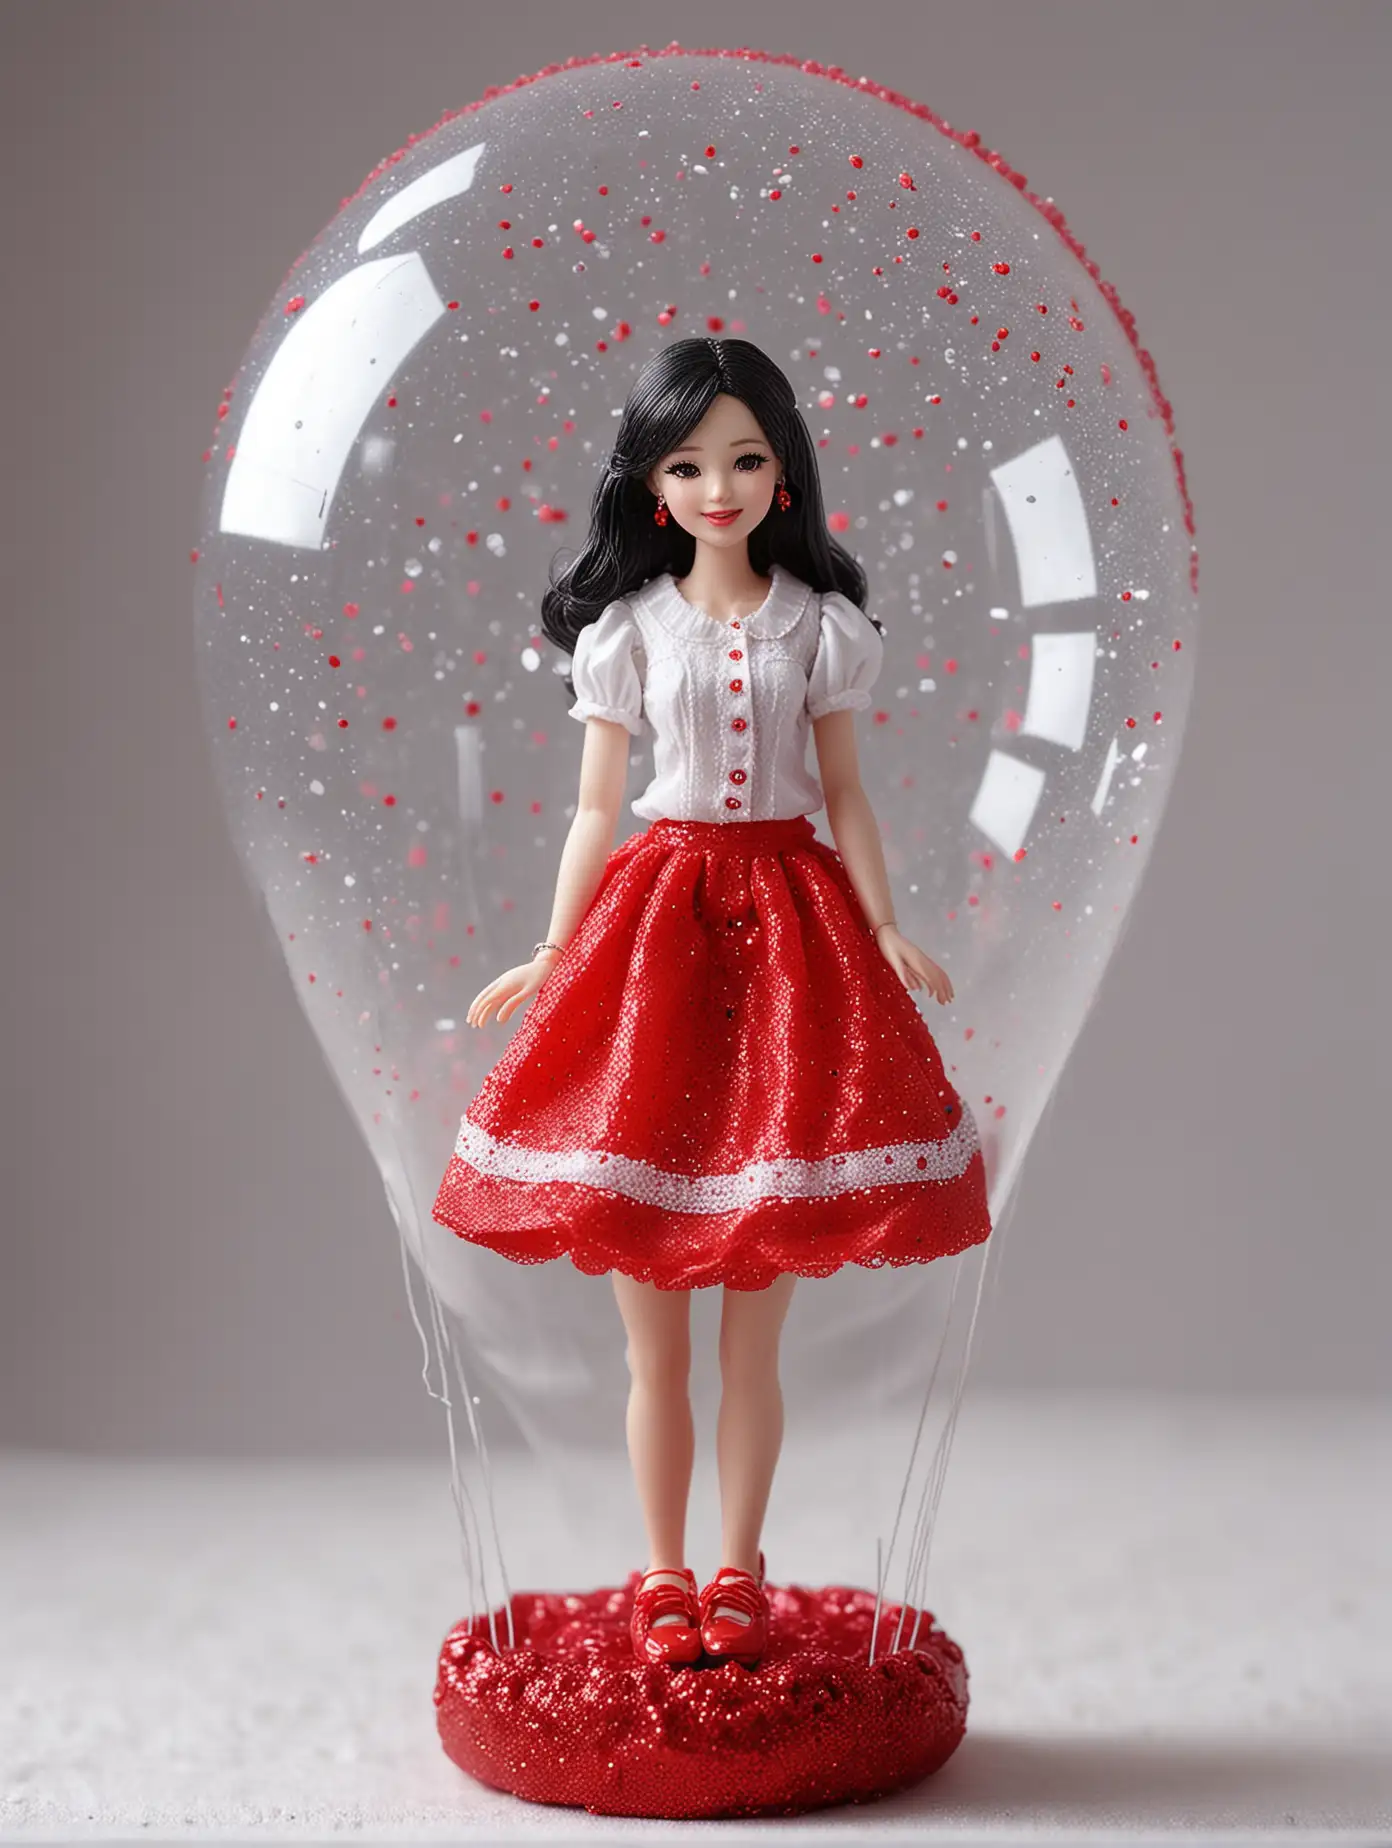 Laughing Teenage Barbie Doll in Red Snow White Glitter Outfit Inside Miniature Balloon